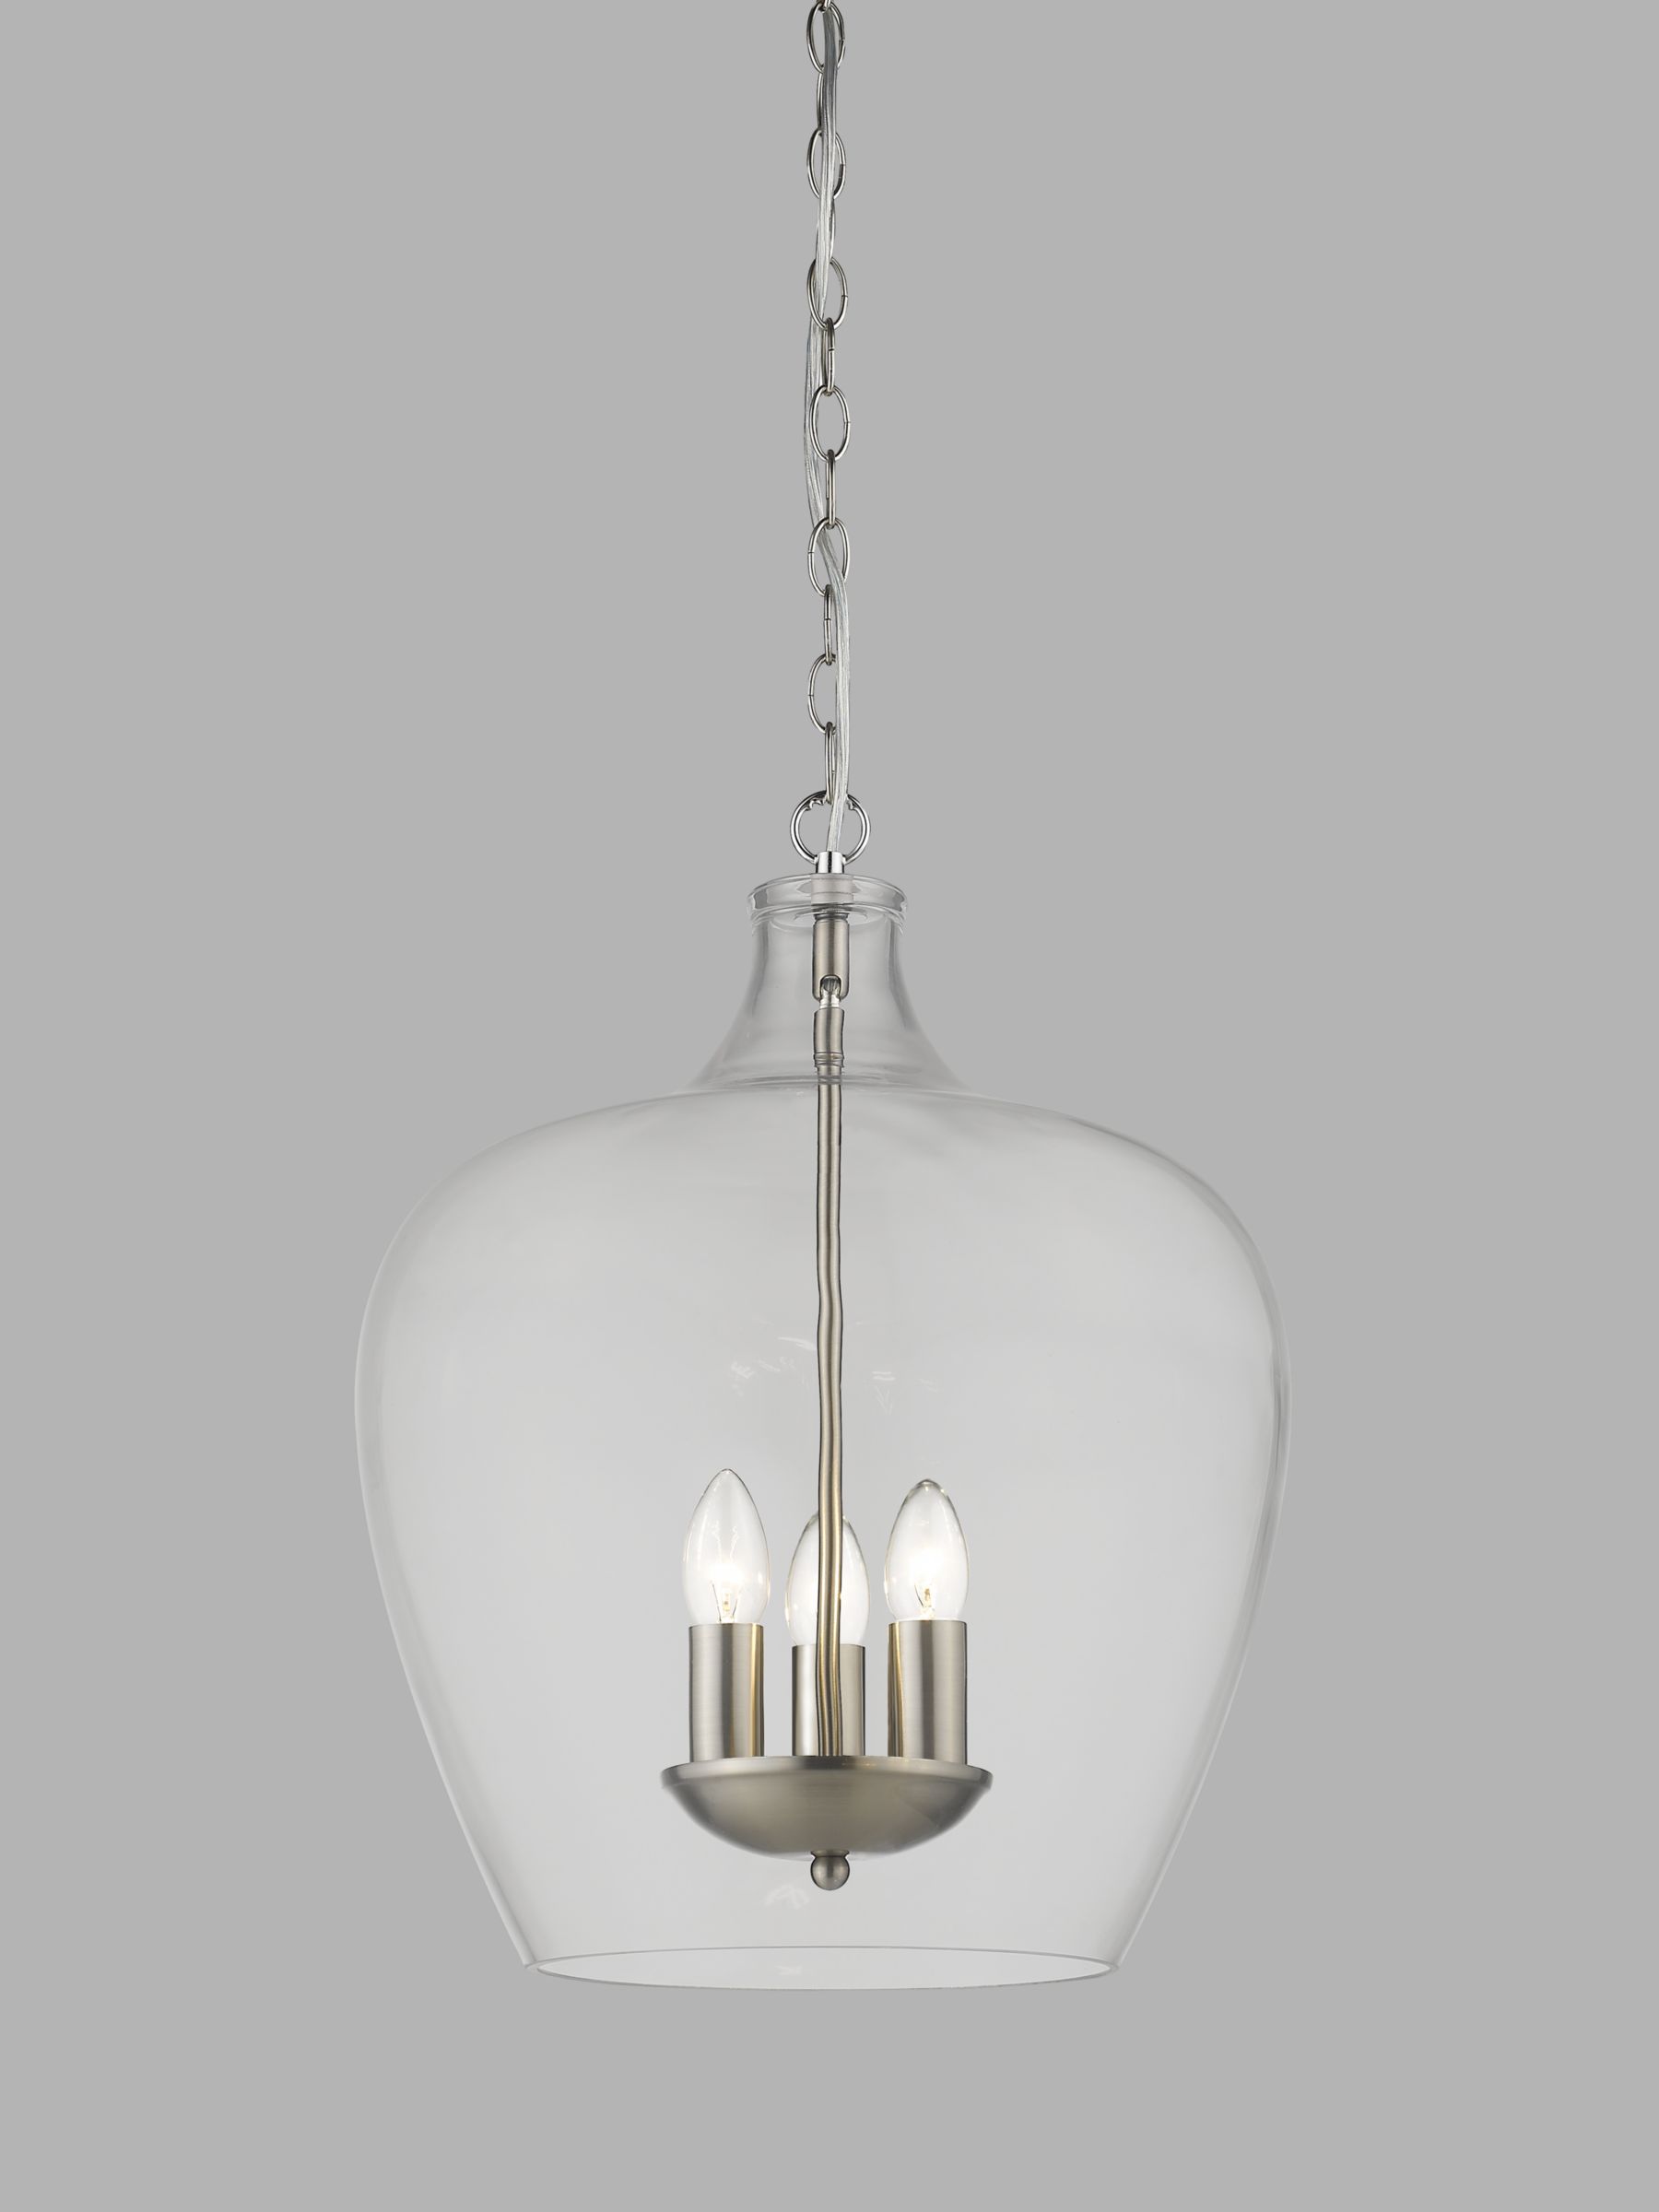 Photo of Impex nell large glass pendant ceiling light